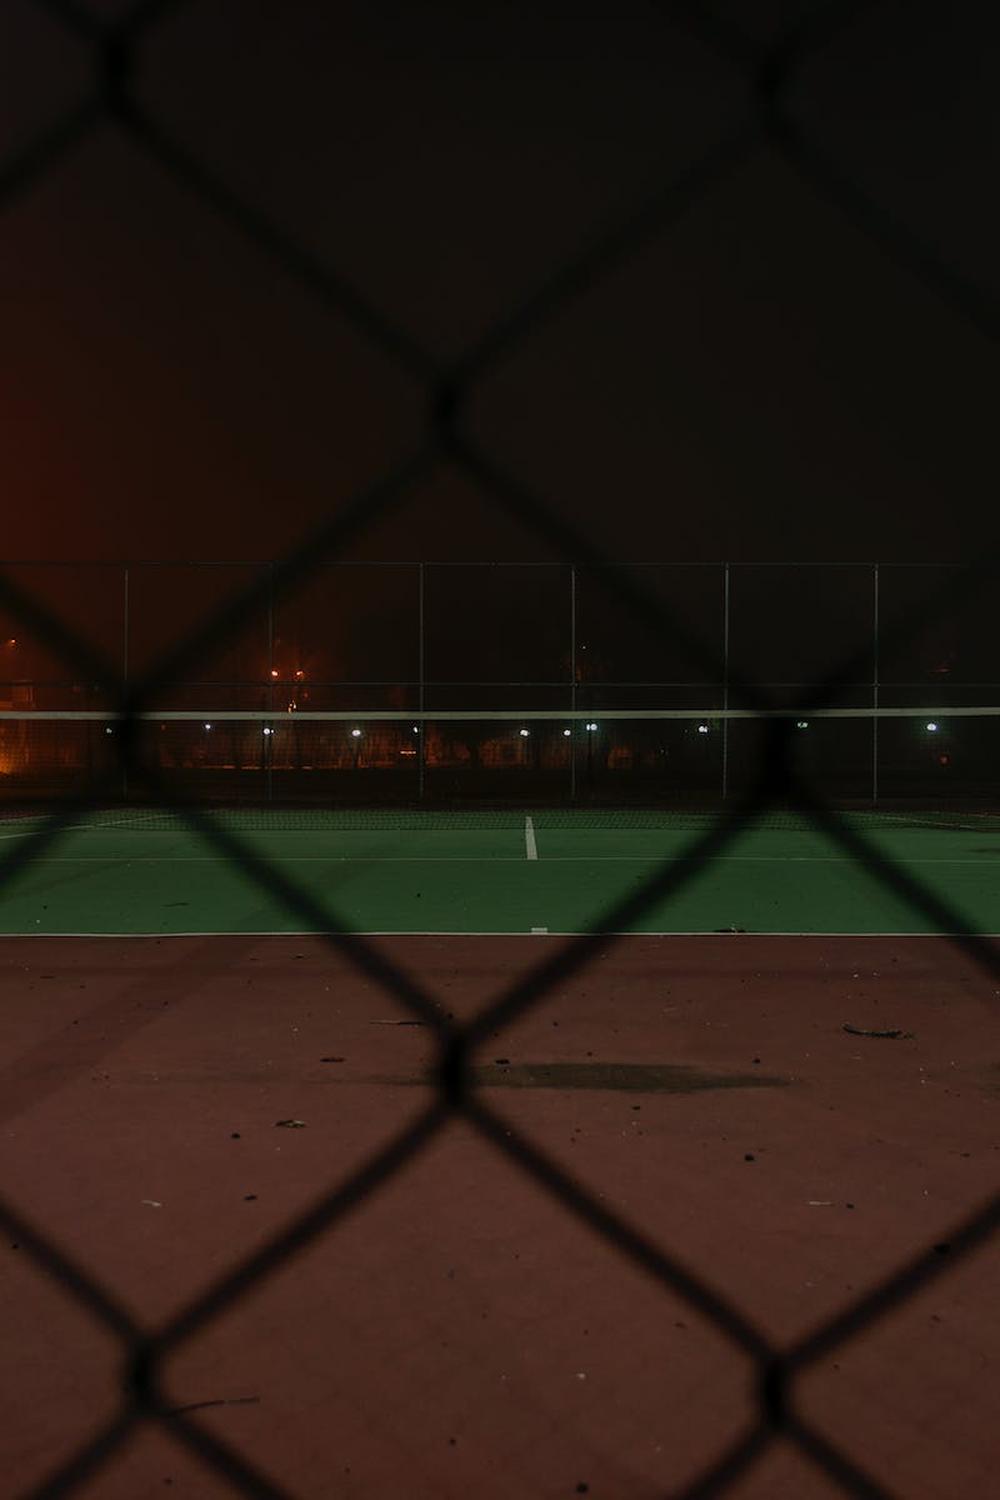 quite_tennis_field_during_nighttime